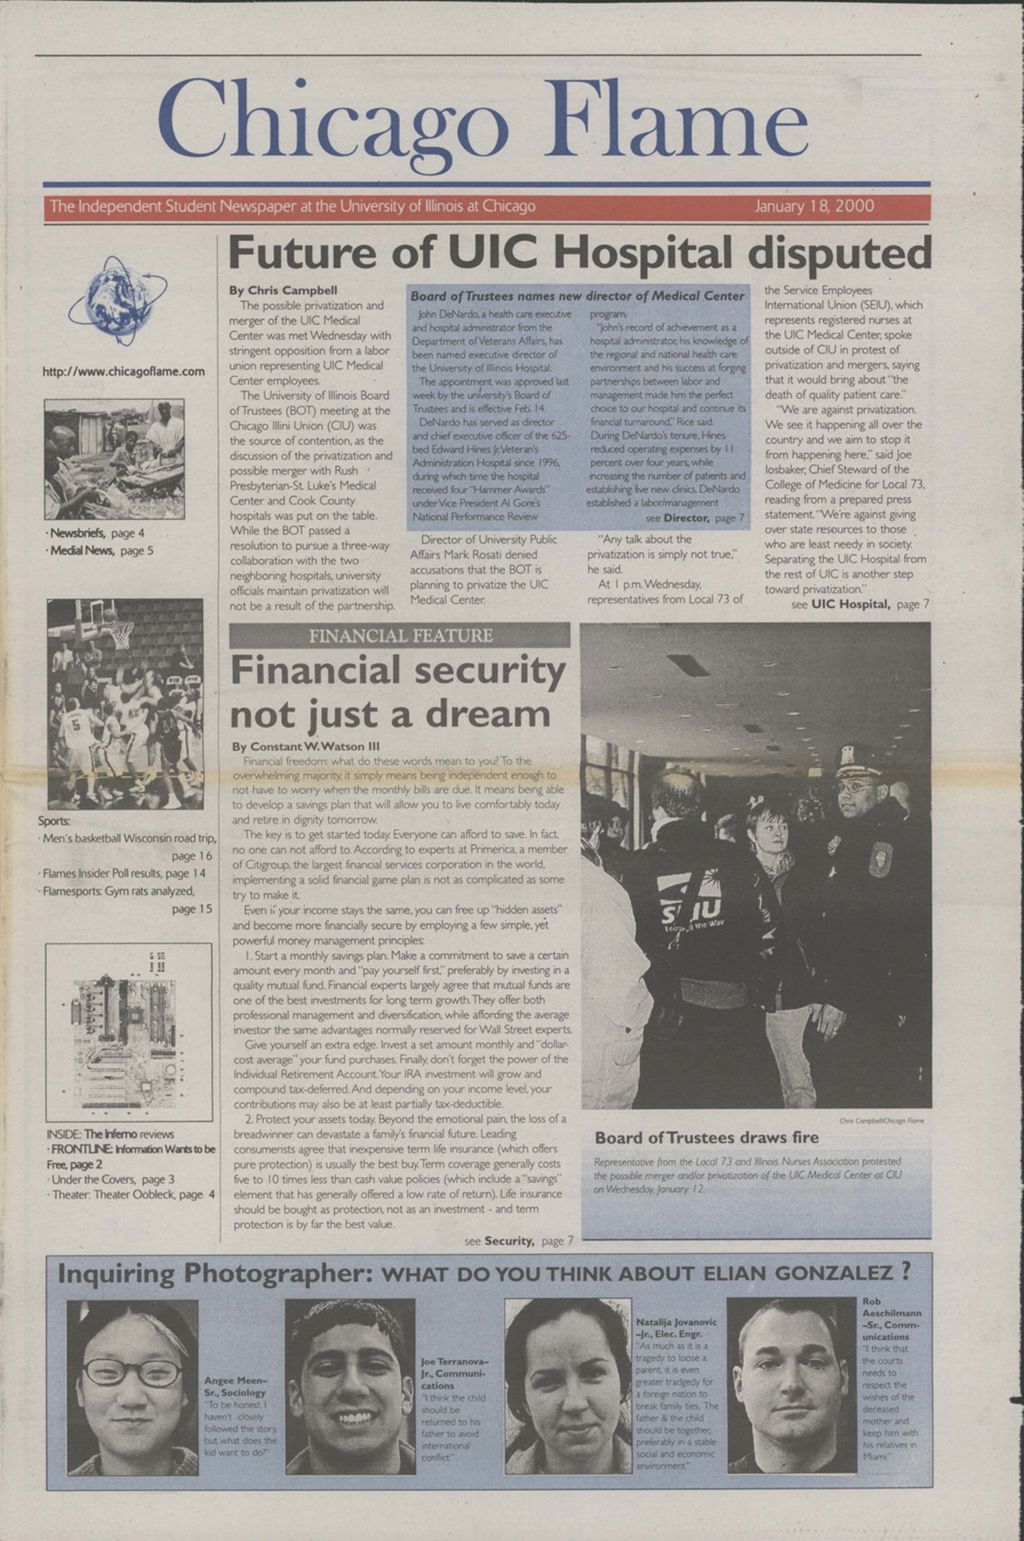 Miniature of Chicago Flame (January 18, 2000)